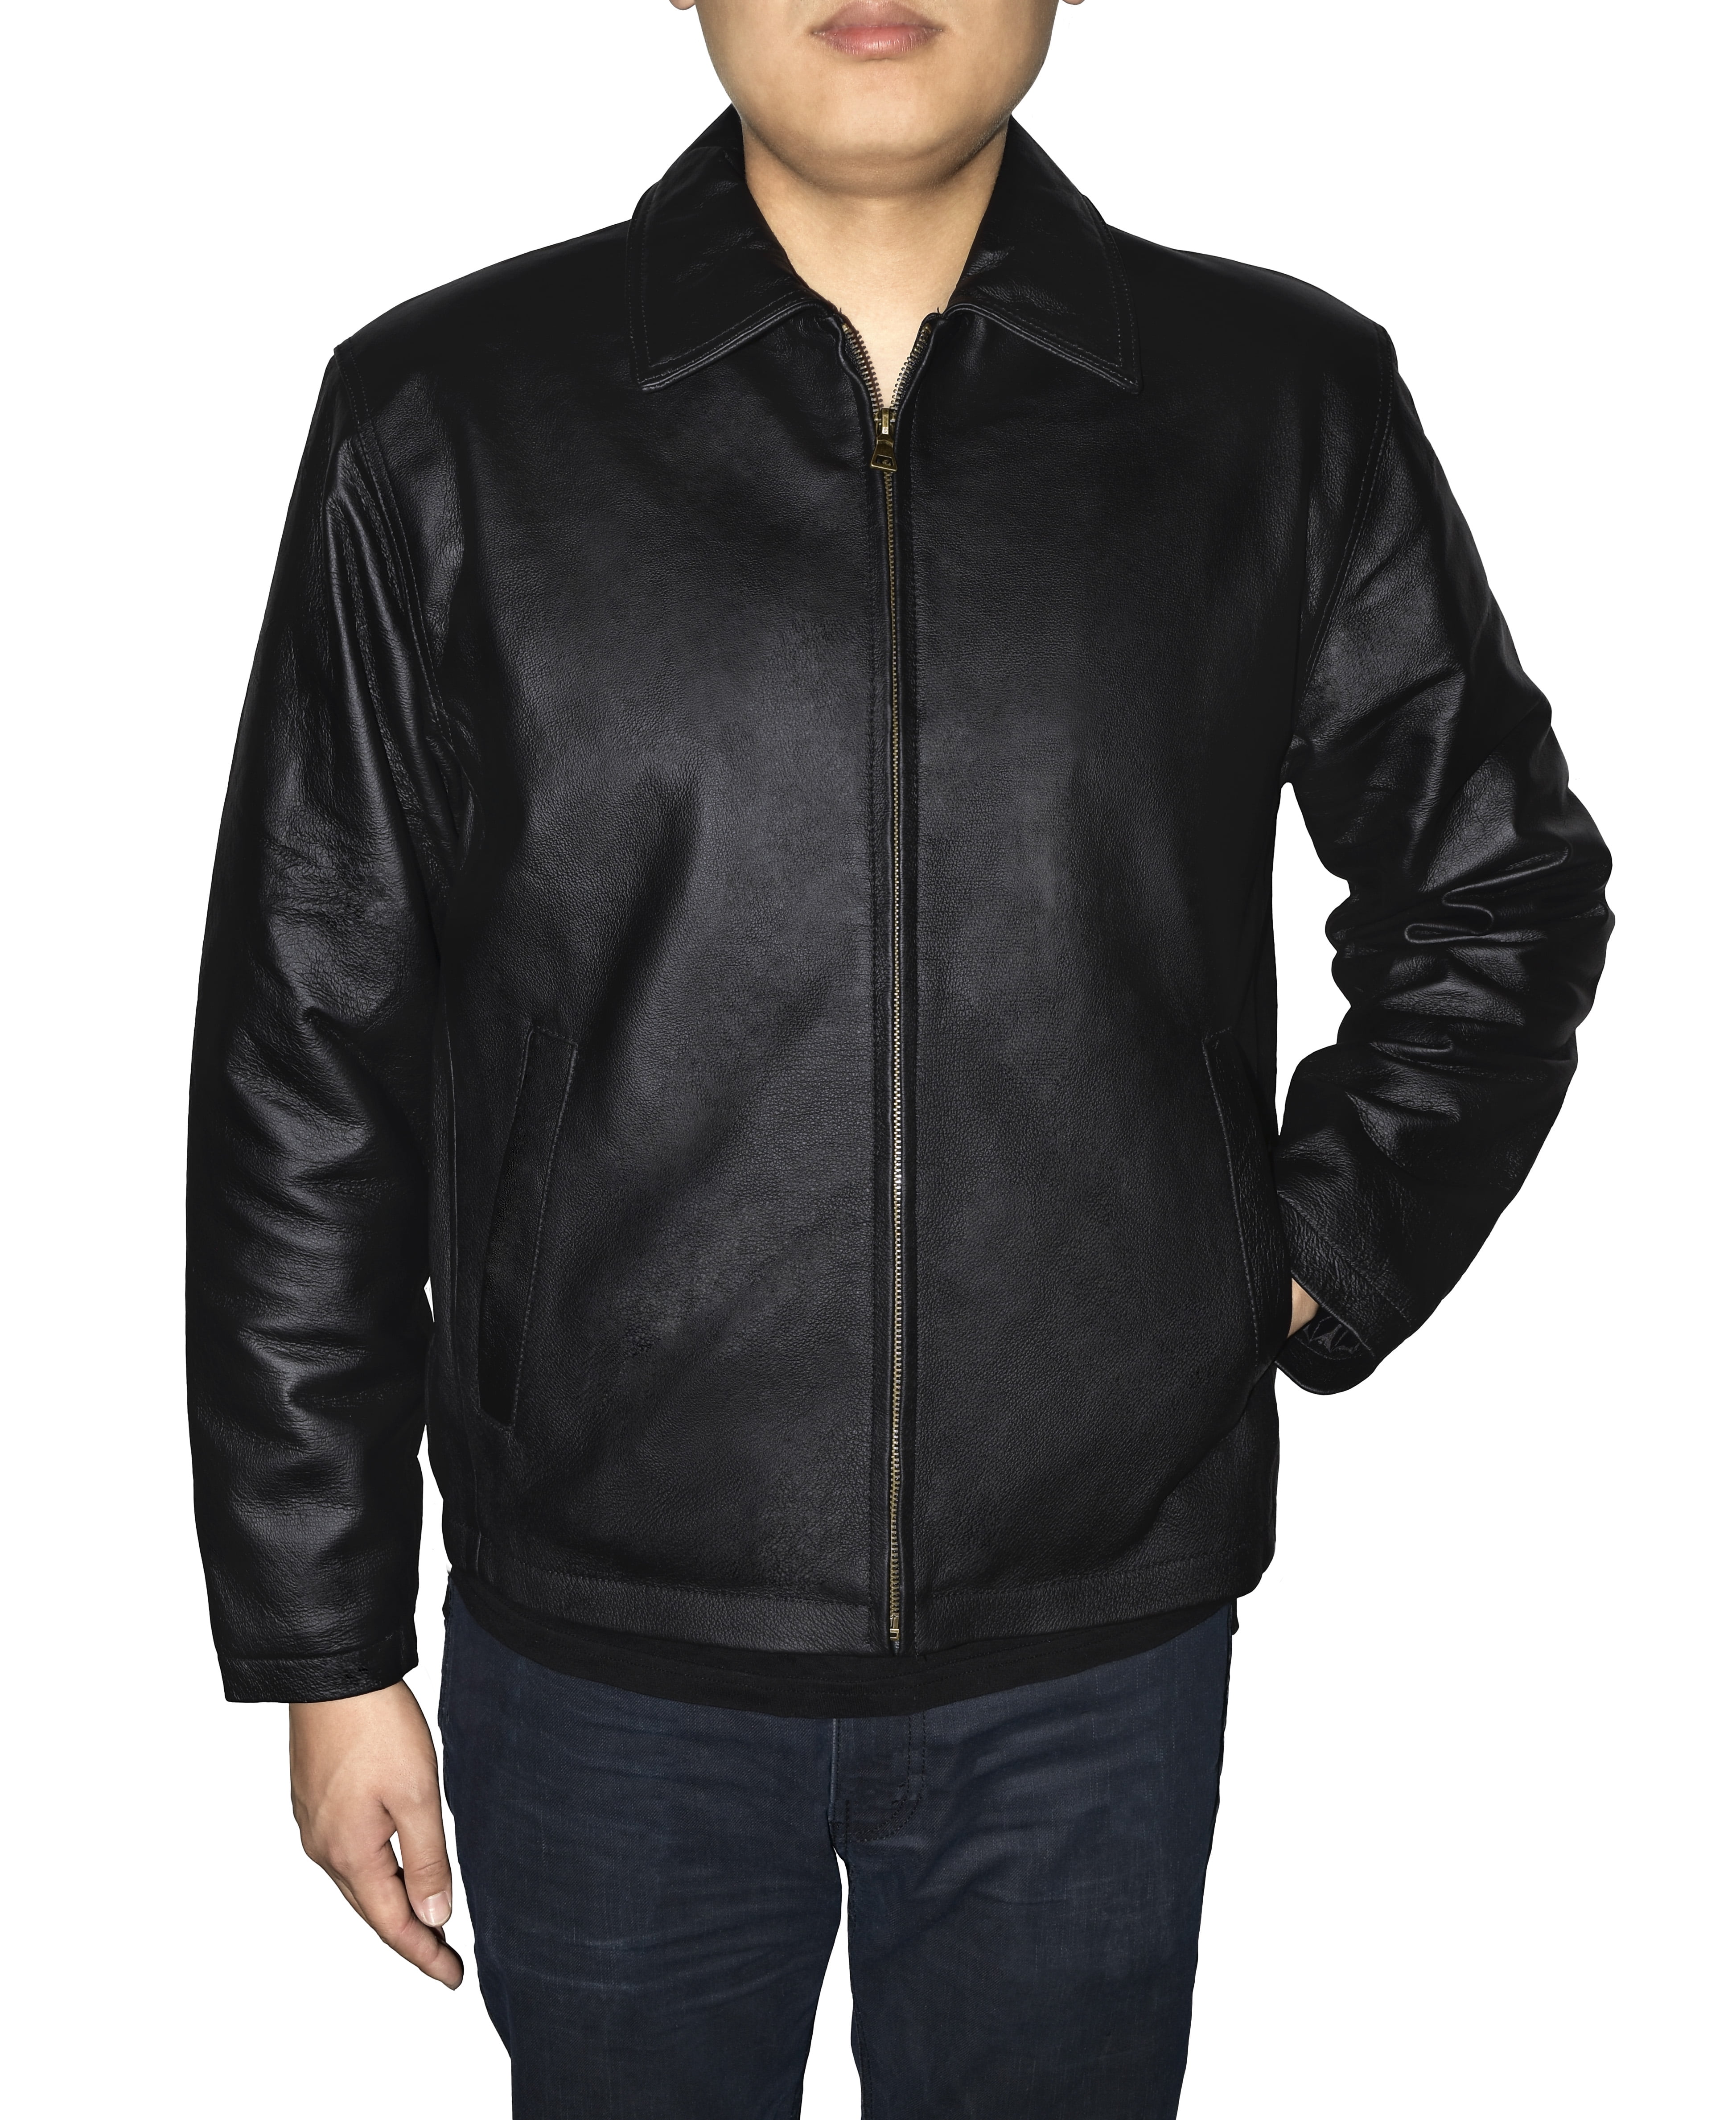 Biggest Sanction Ruby Victory Outfitters Men's Genuine Leather Open Bottom Jacket - Black - 3XLB  - Walmart.com